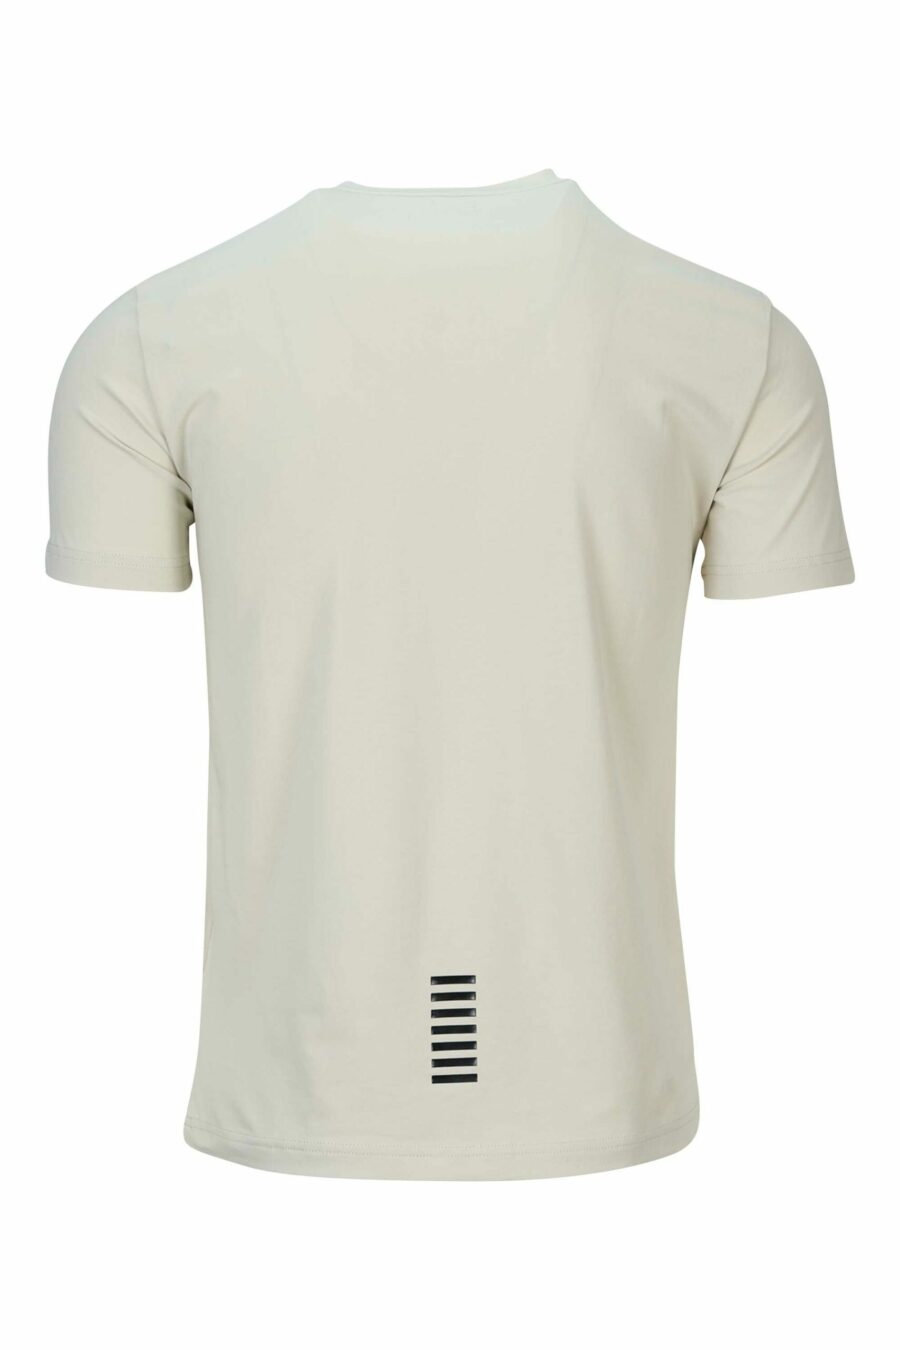 Beige T-shirt with rubber "lux identity" minilogue - 8058947457700 1 scaled